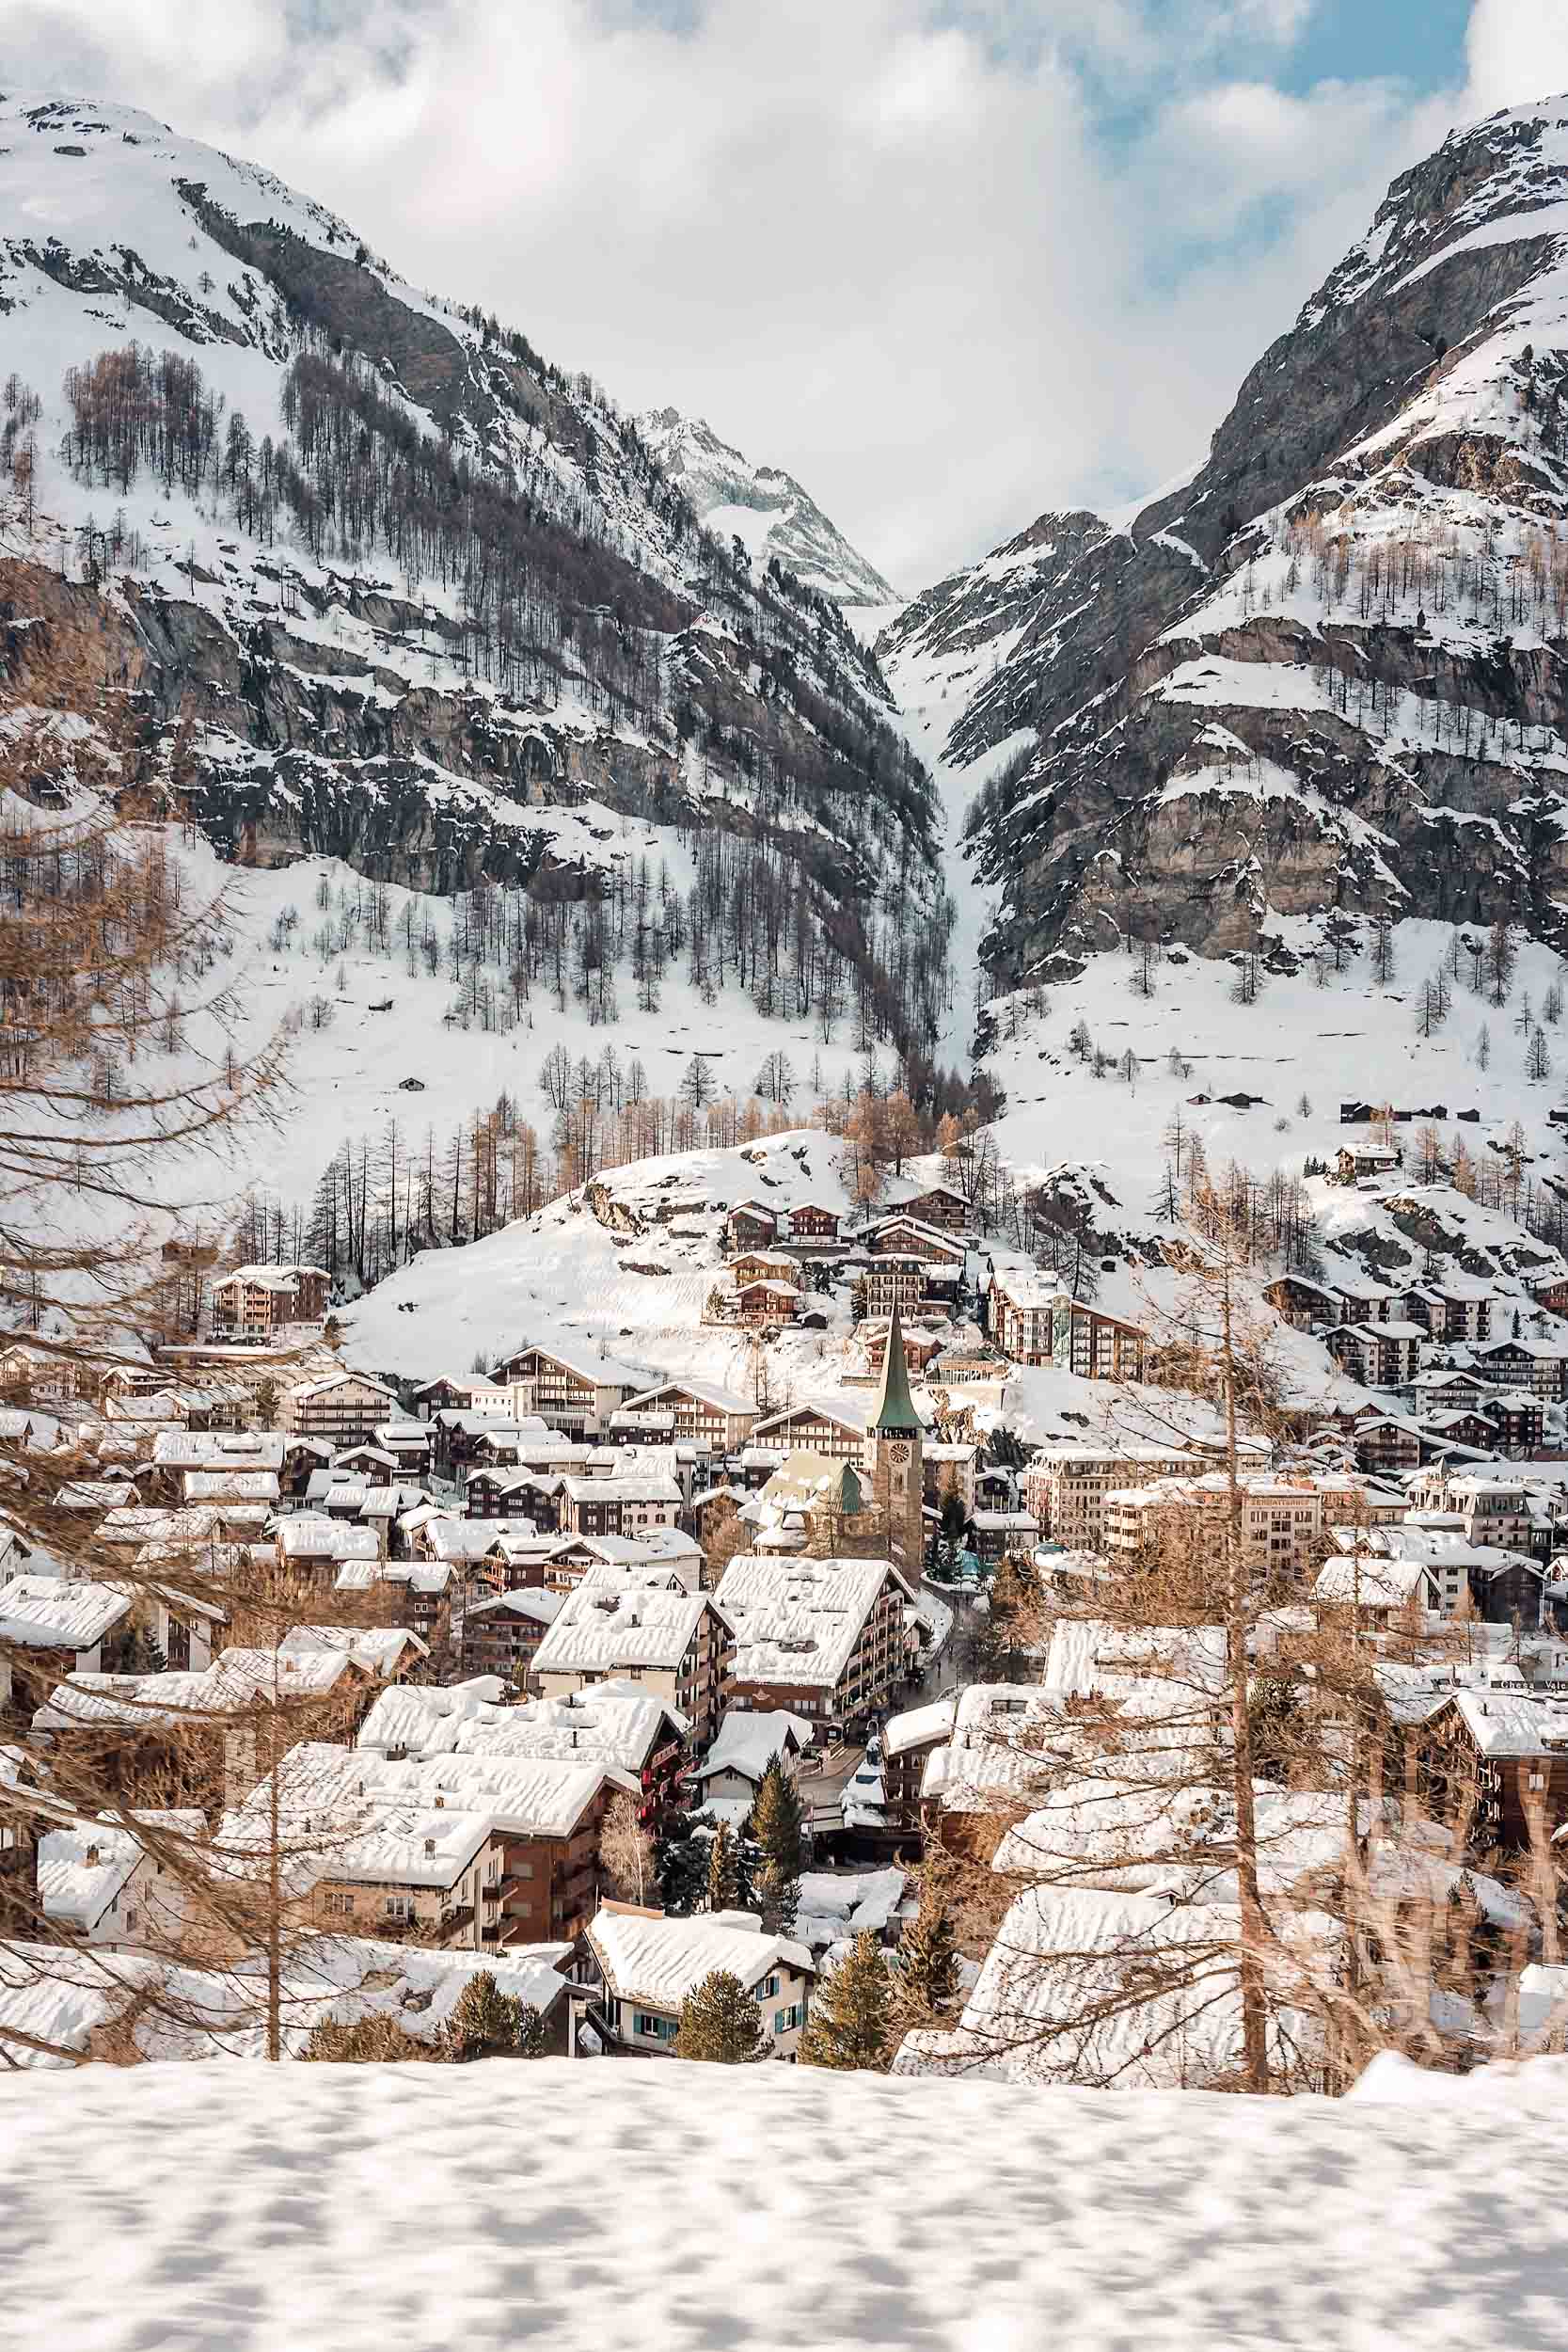 A view of Zermatt, Switzerland from the train coming down from the mountains